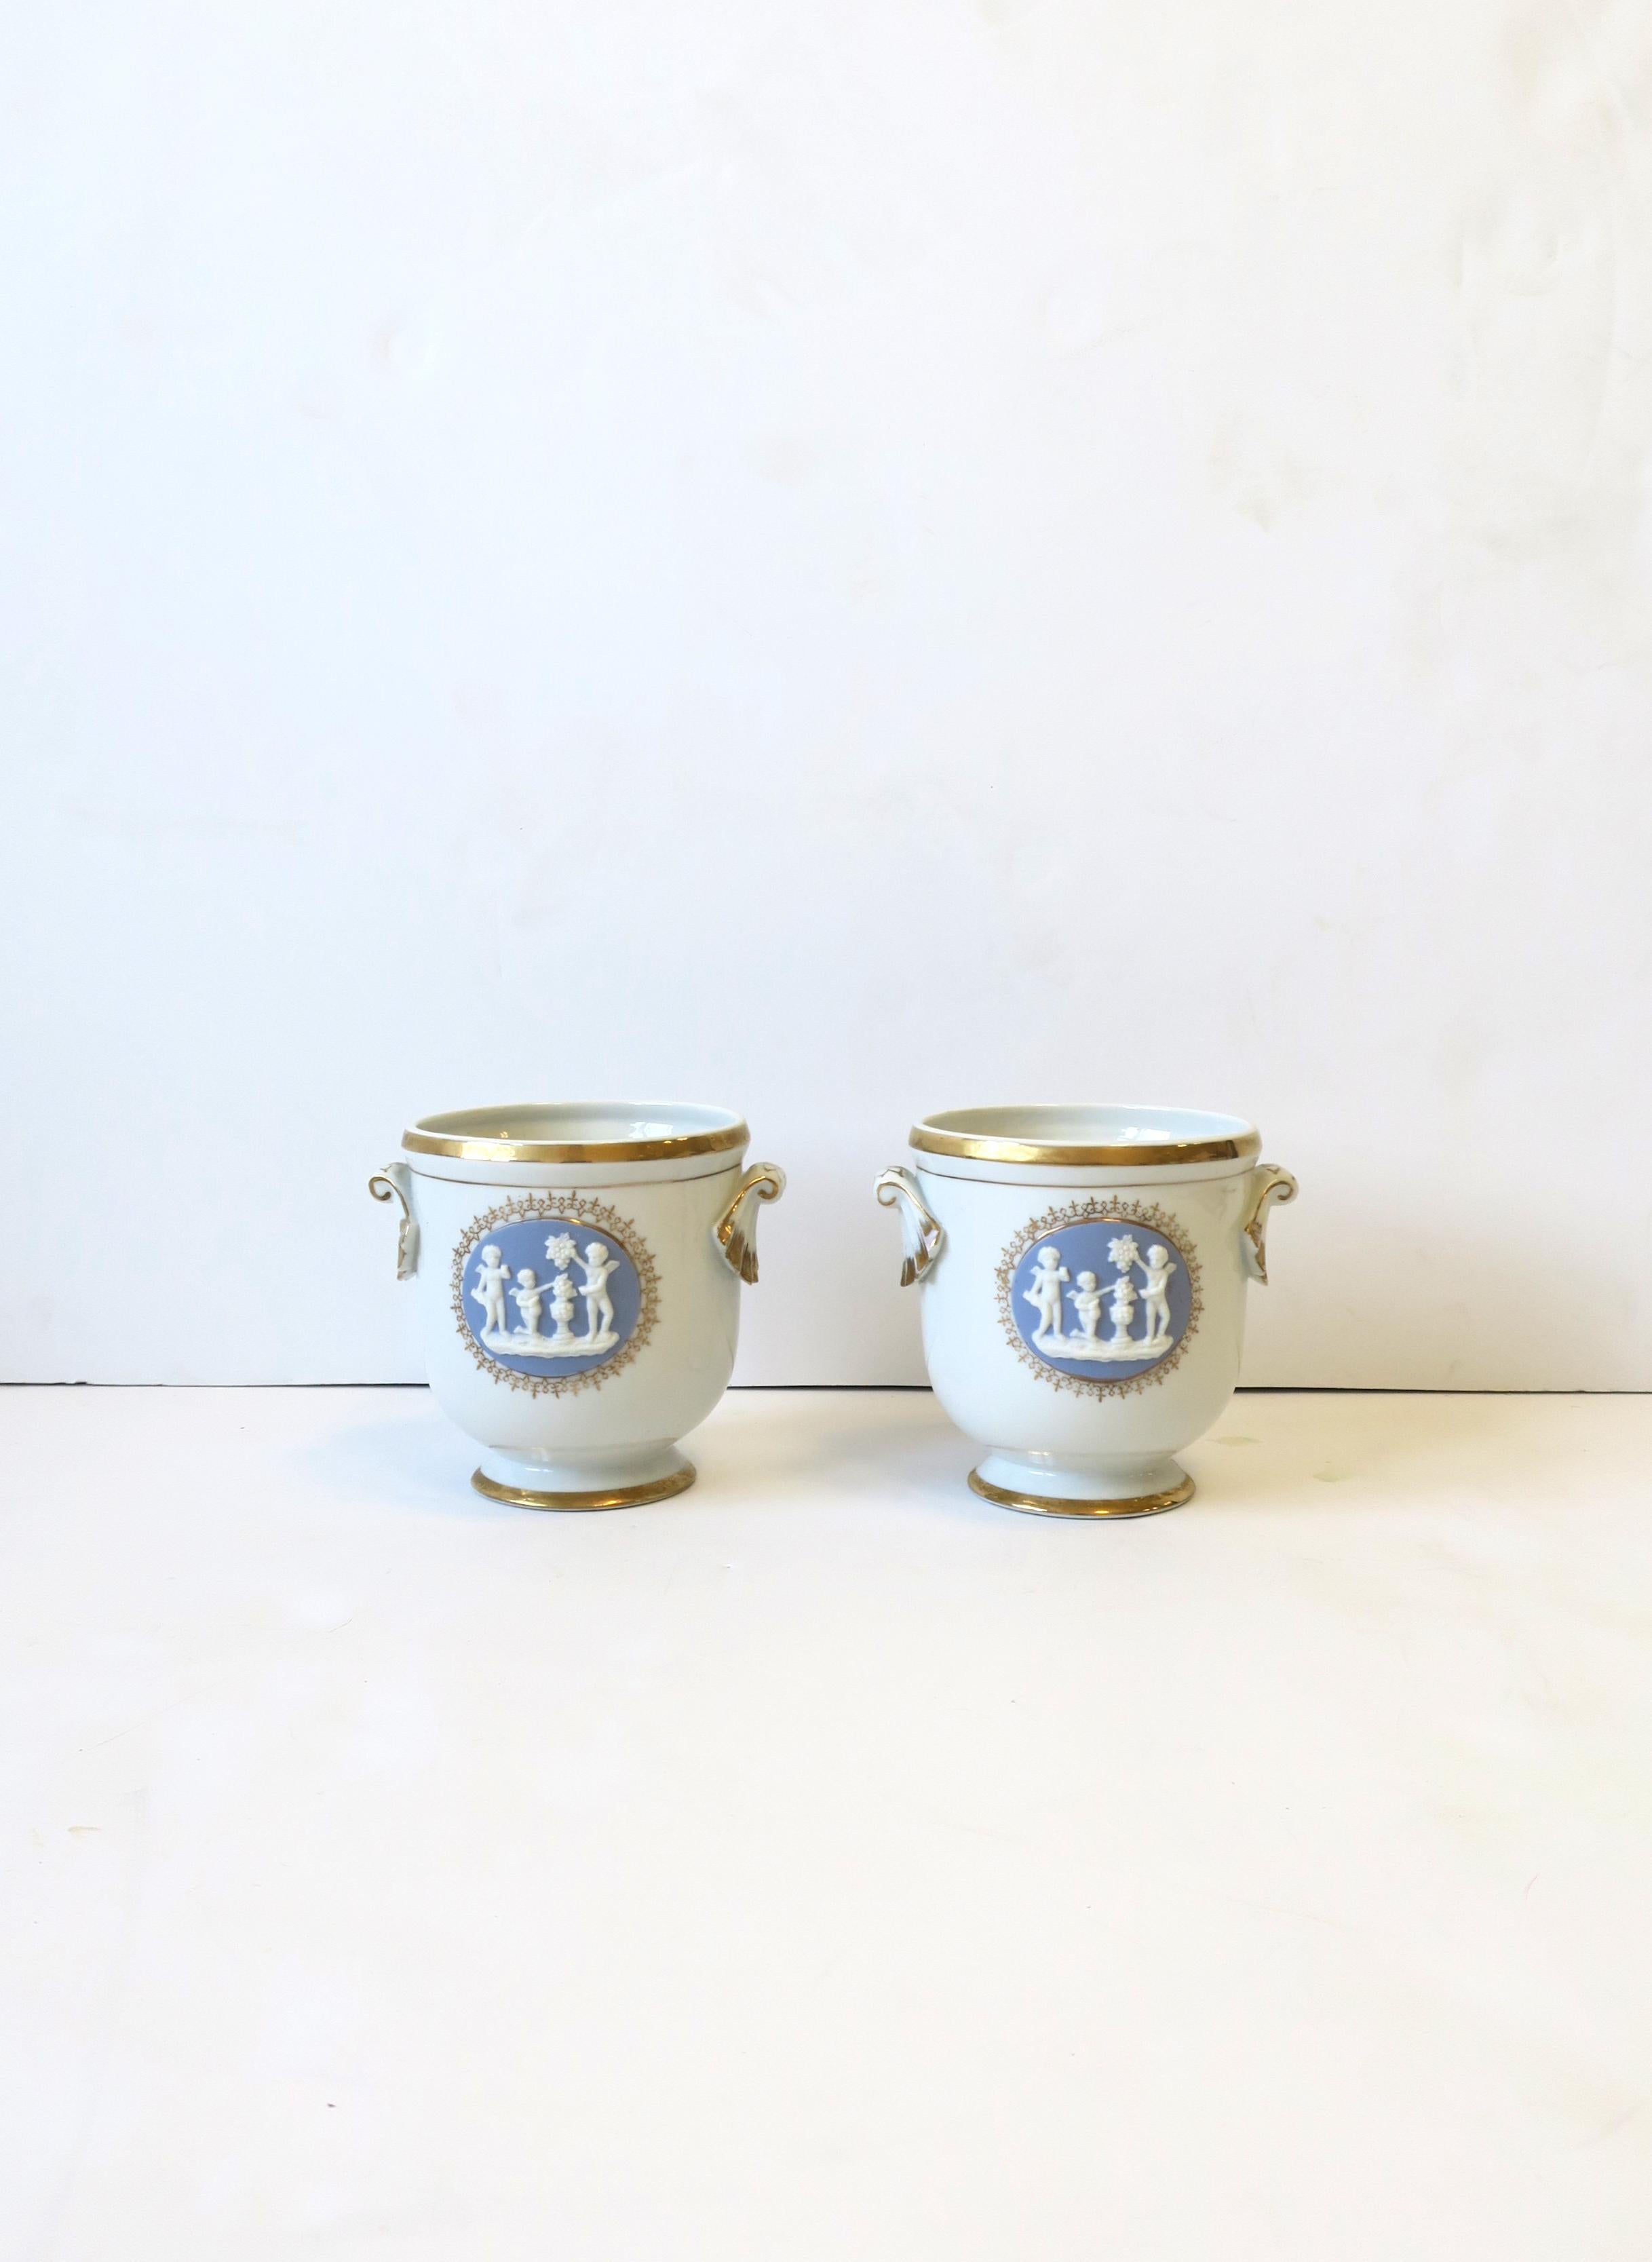 A beautiful small pair of porcelain ceramic cachepots or jardinières with neoclassical relief scene, circa early to mid-20th century, Europe. Cachepots or jardinières are white with a light blue raised relief scene on front, handles on sides, and